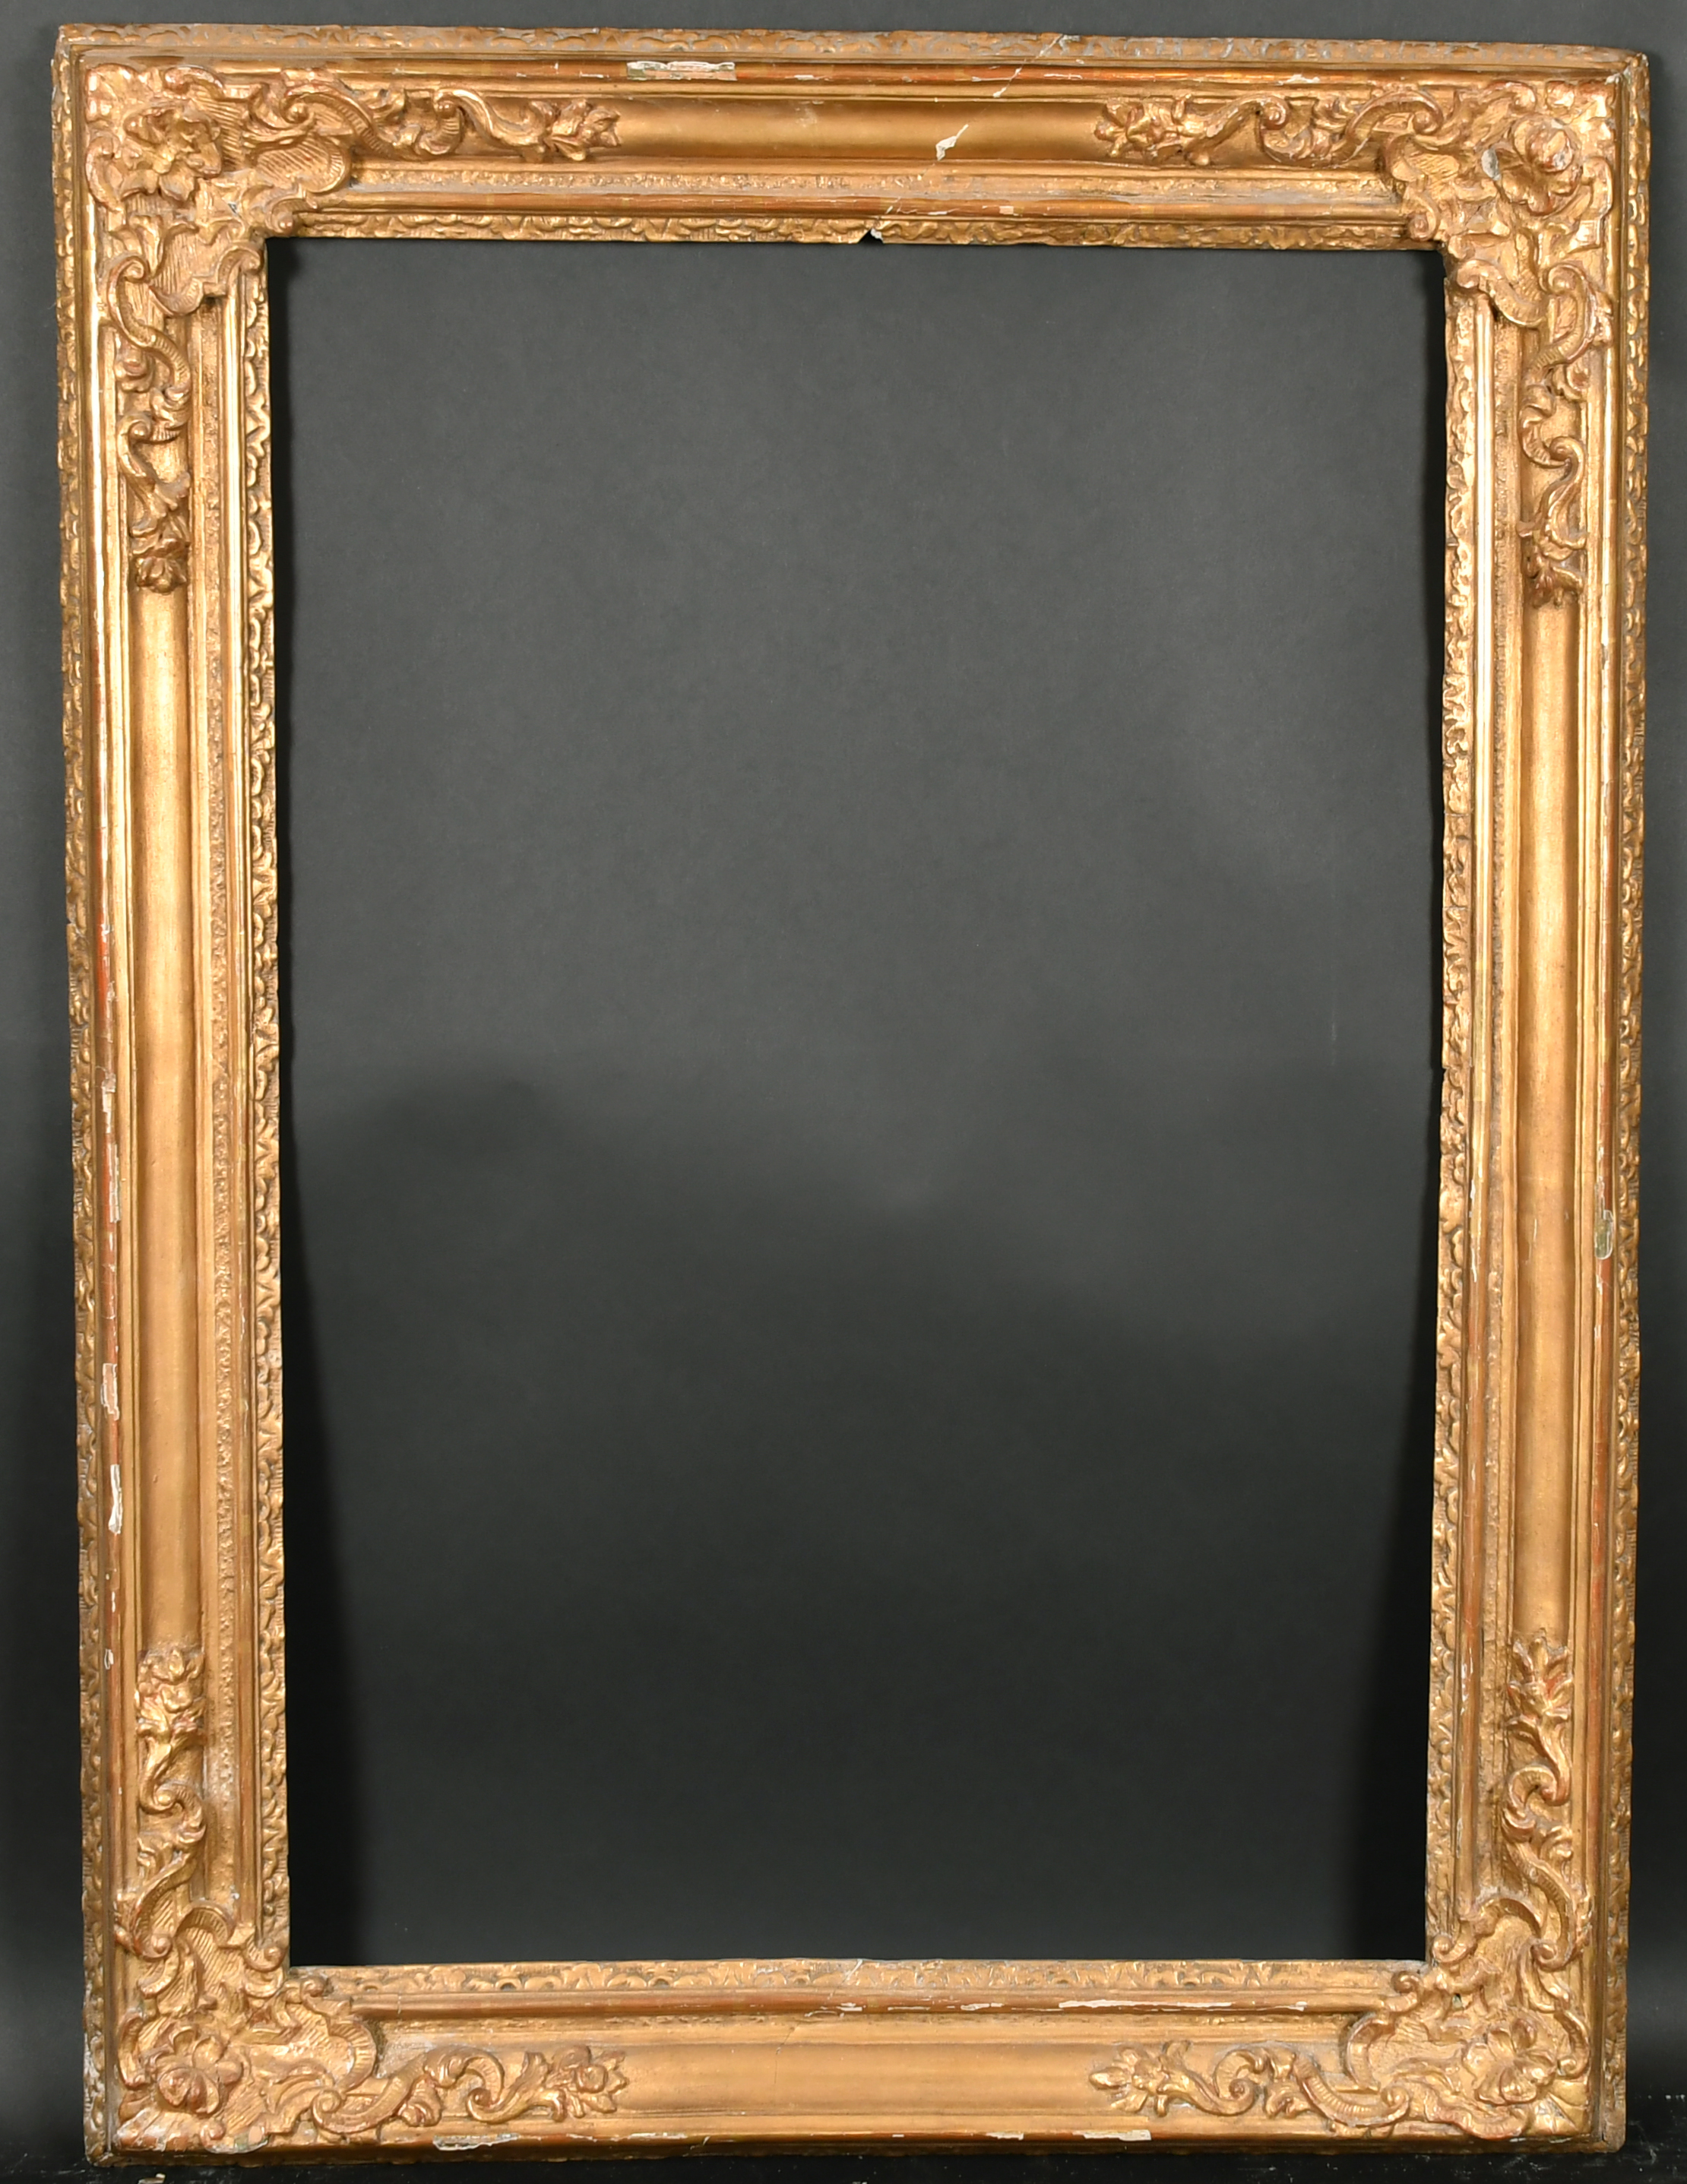 18th Century French School. A Carved Giltwood Frame, rebate 41.5" x 28" (105.4 x 71.1cm) - Image 2 of 3